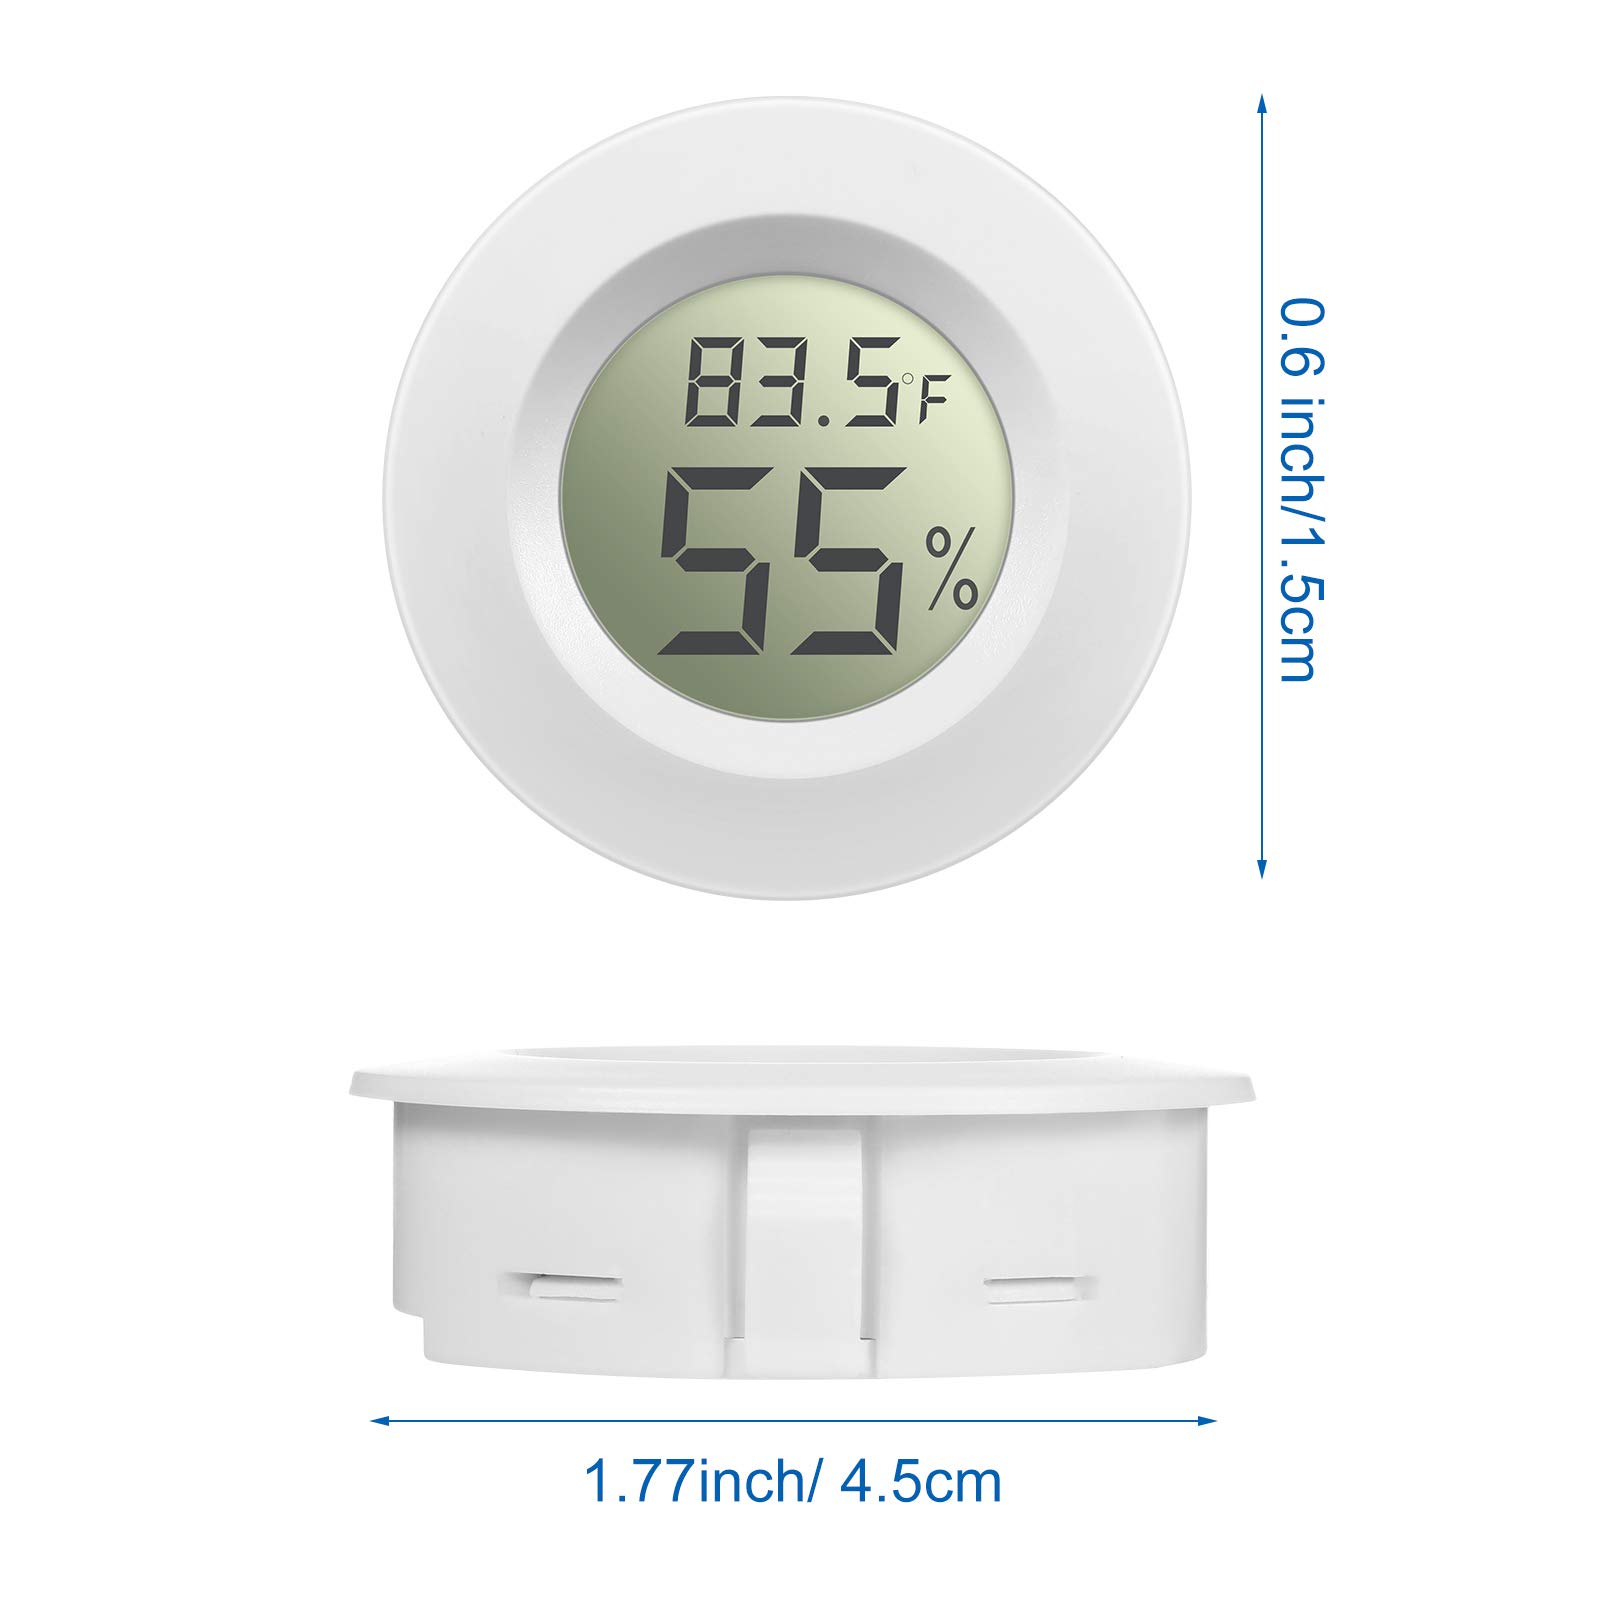 8 Pieces Mini Hygrometer Thermometer Round Digital Humidity Gauge Monitor Electronic Humidity Temperature Meter LCD Display Indoor Outdoor Hygrometer Thermometer for Greenhouse Home Kitchen (White)